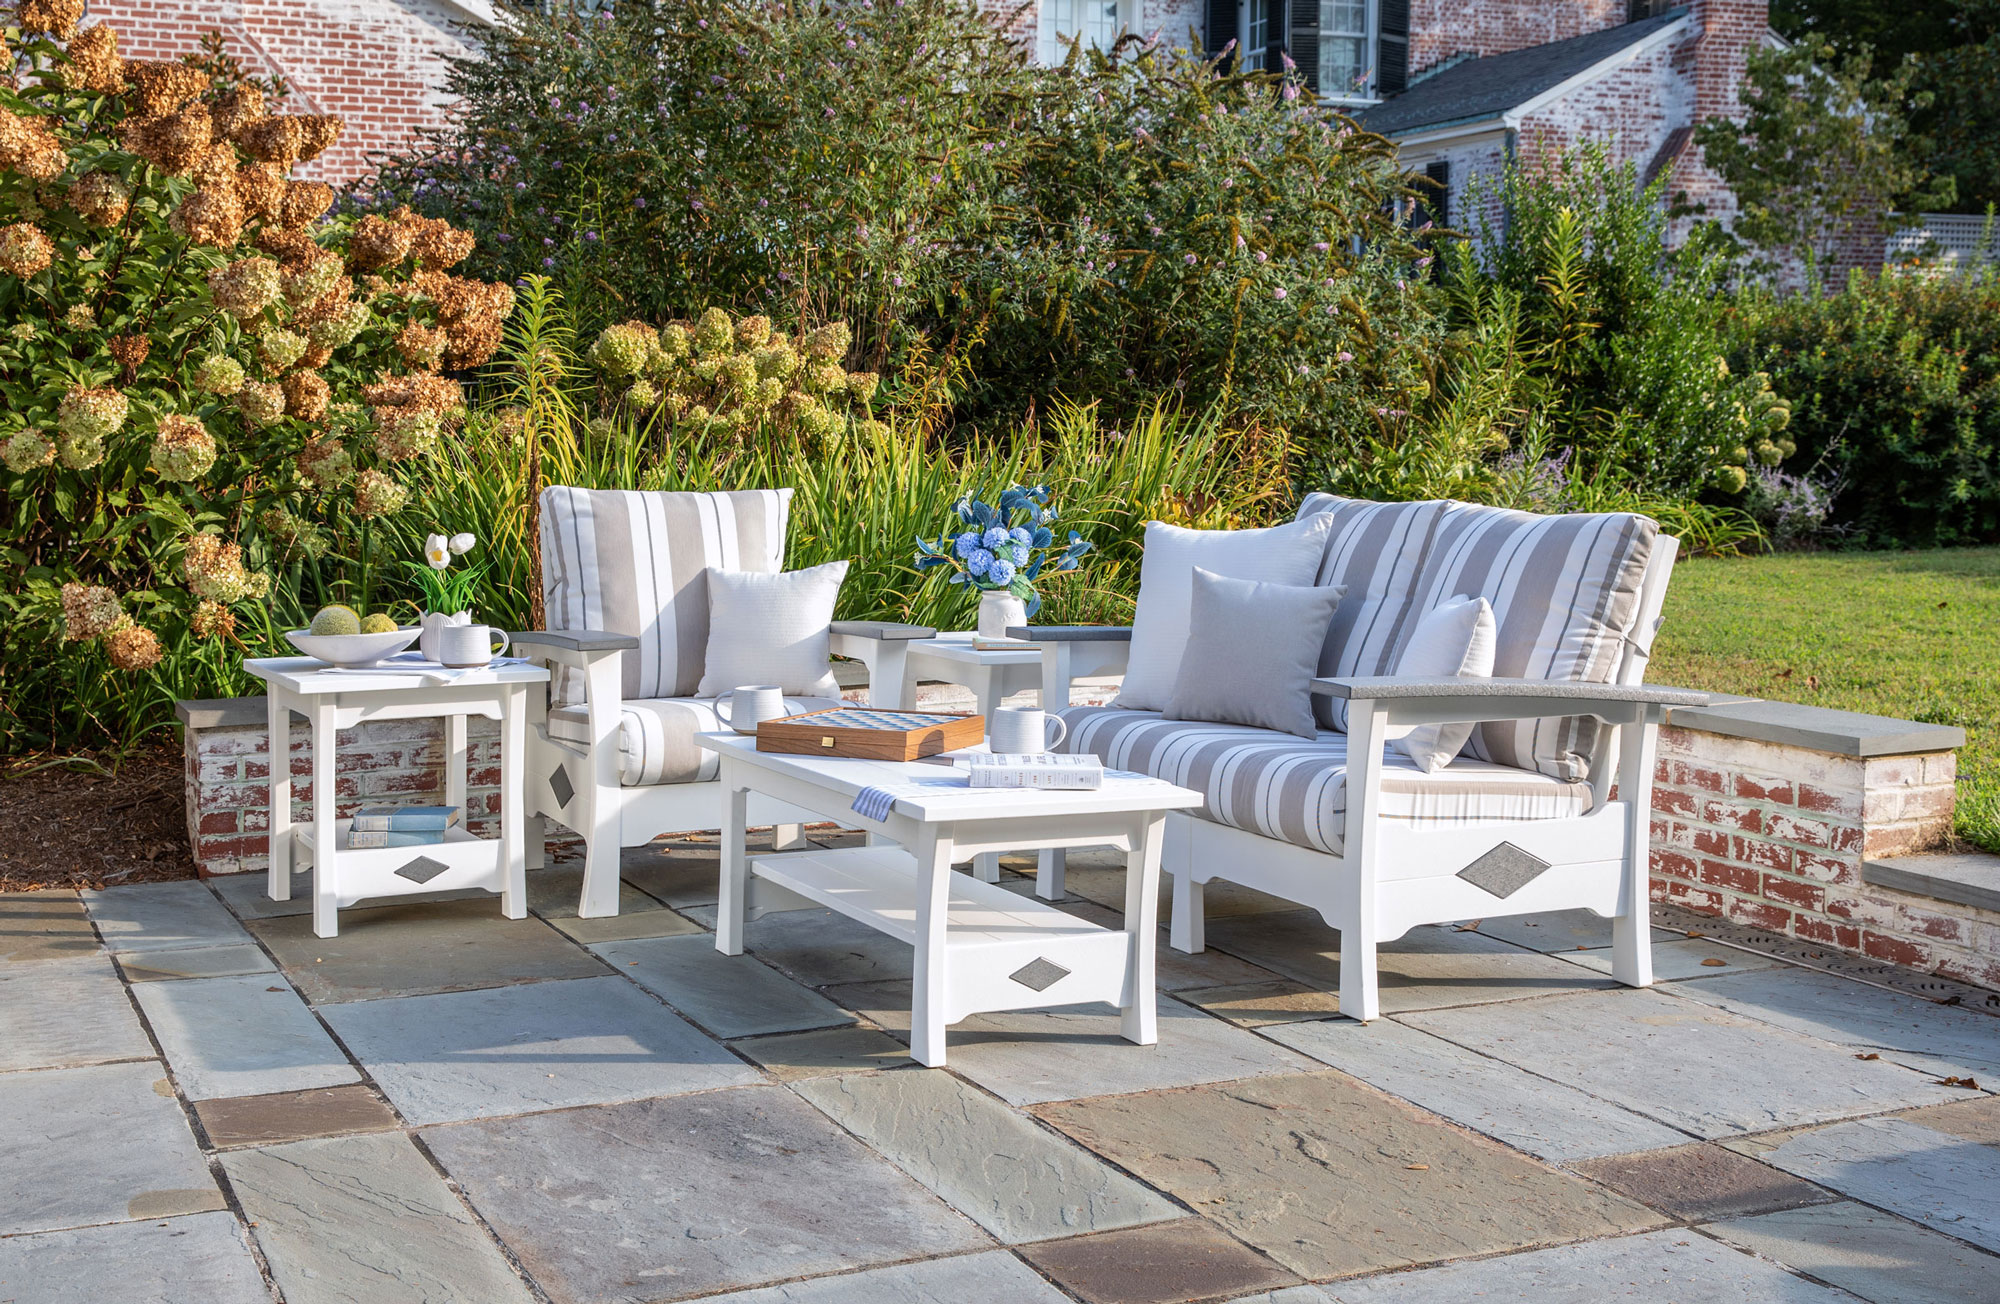 Outdoor Leisure Lawns furniture on patio